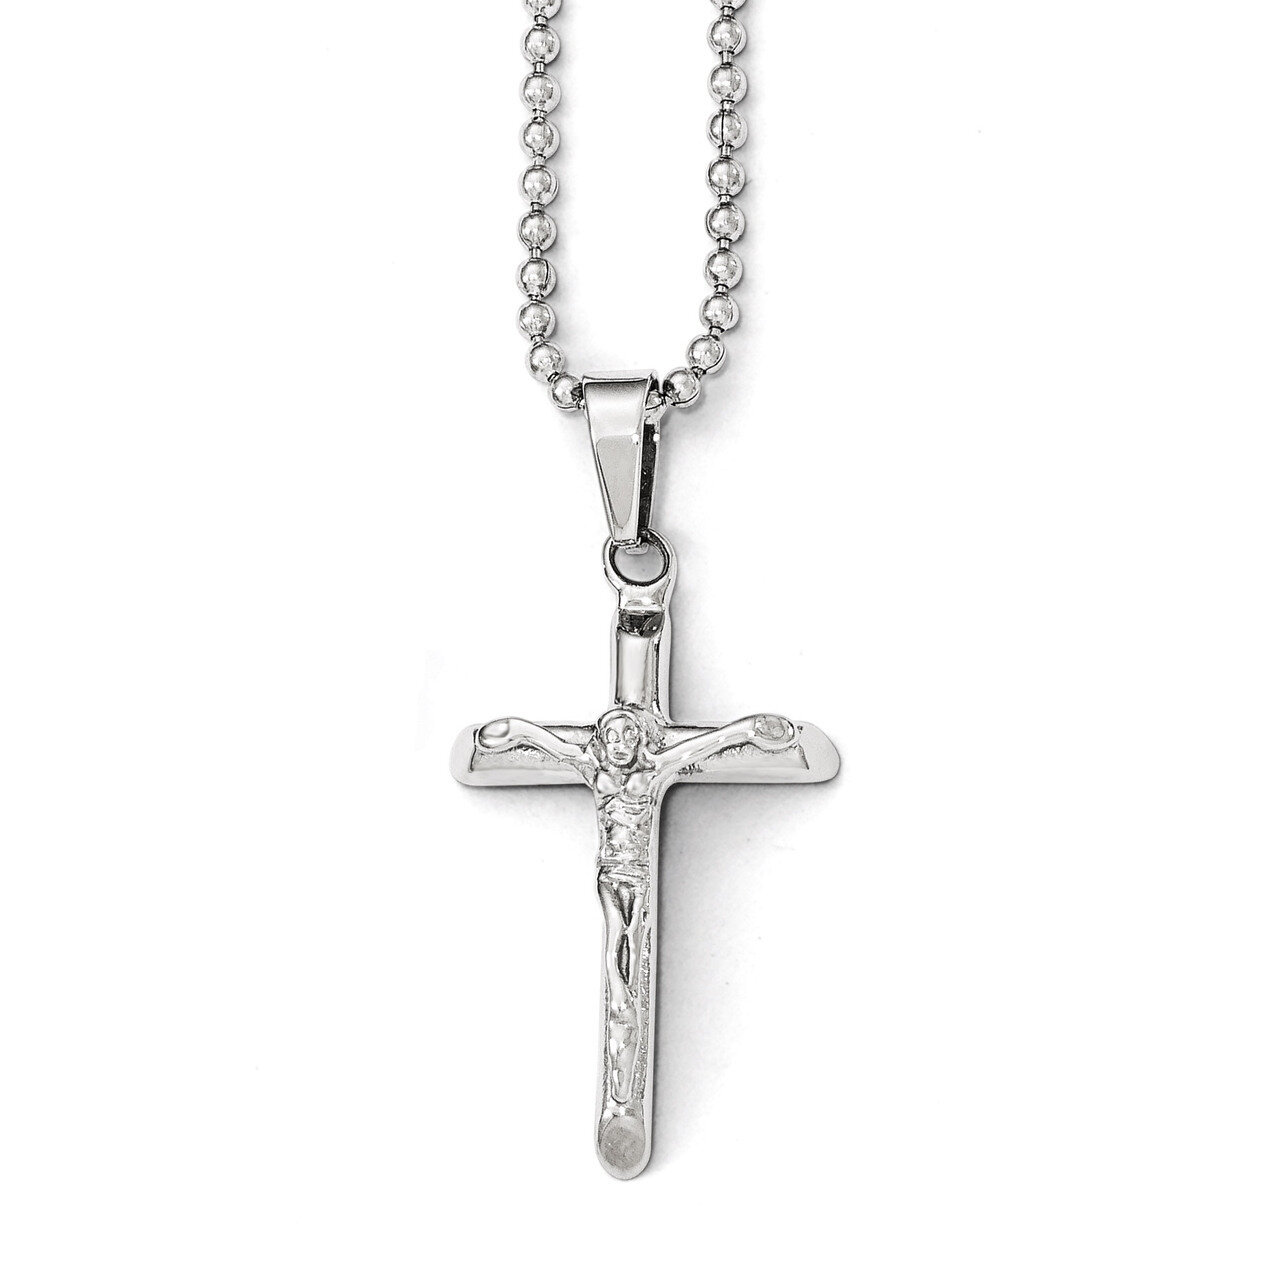 Polished Cross with Jesus Necklace - Stainless Steel SRN1813-20